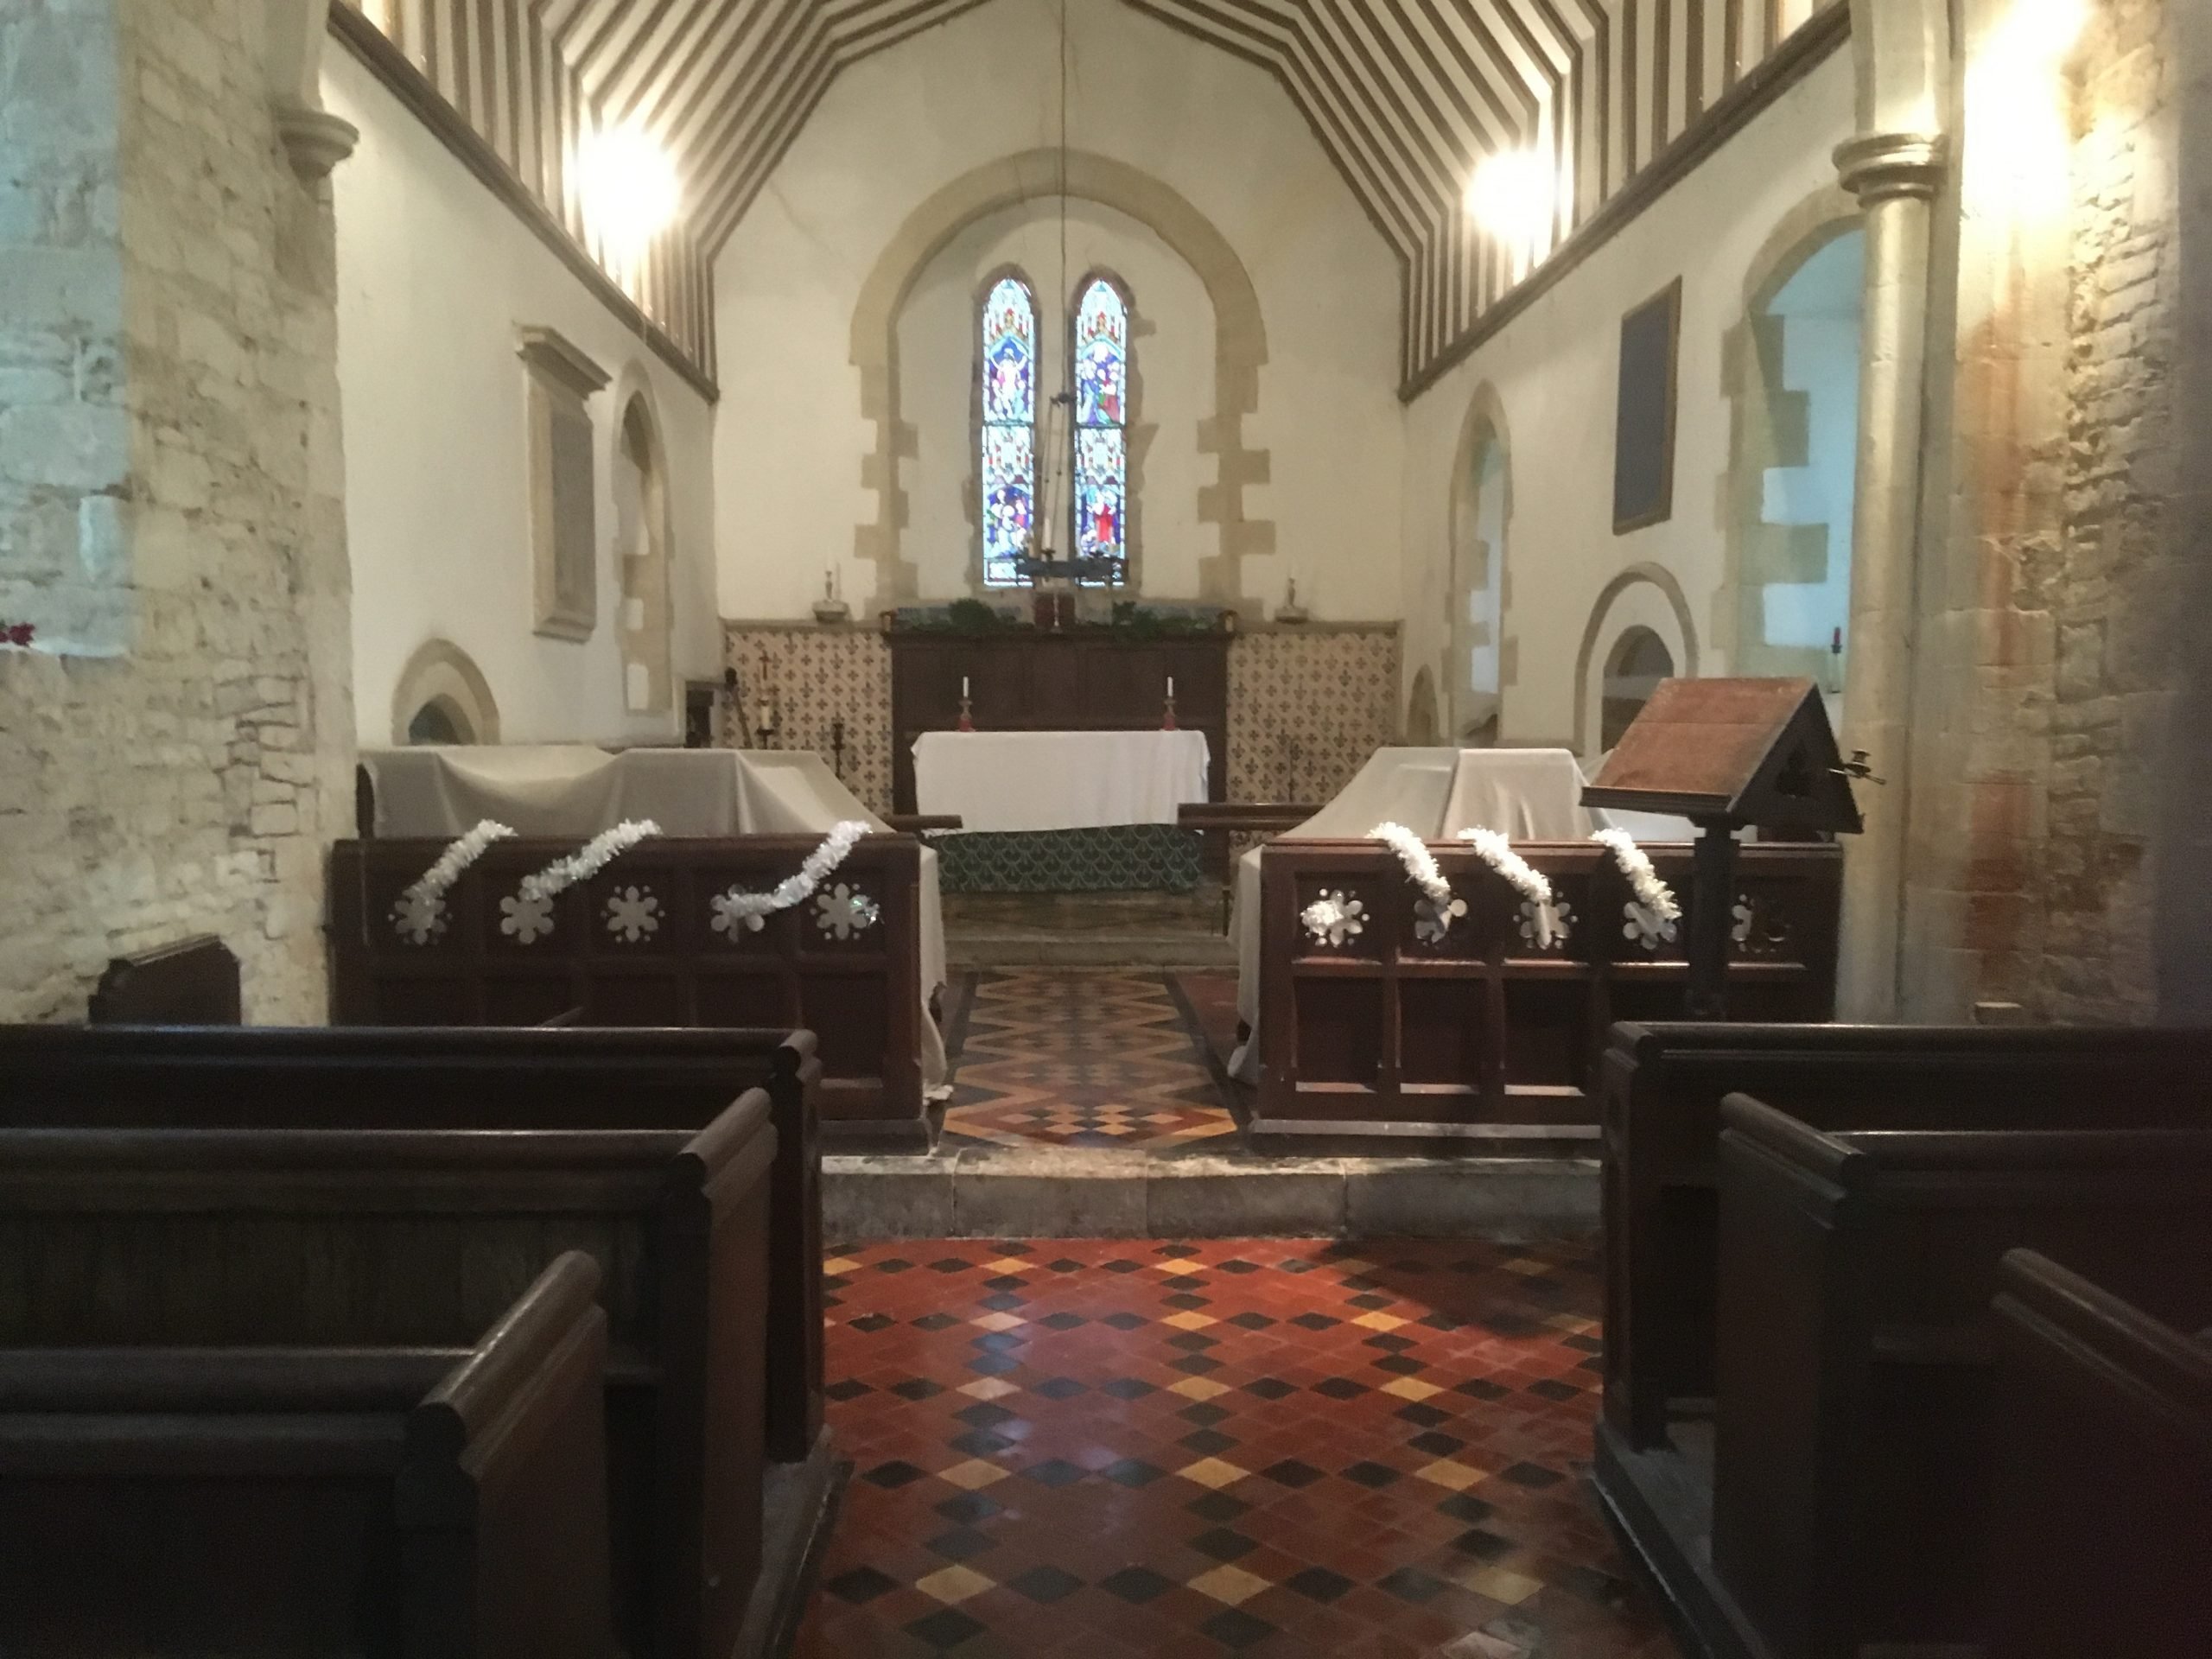 Interior of church ready for Christmas looking towards the chancel, with covers on choir stalls to protect from bat droppings